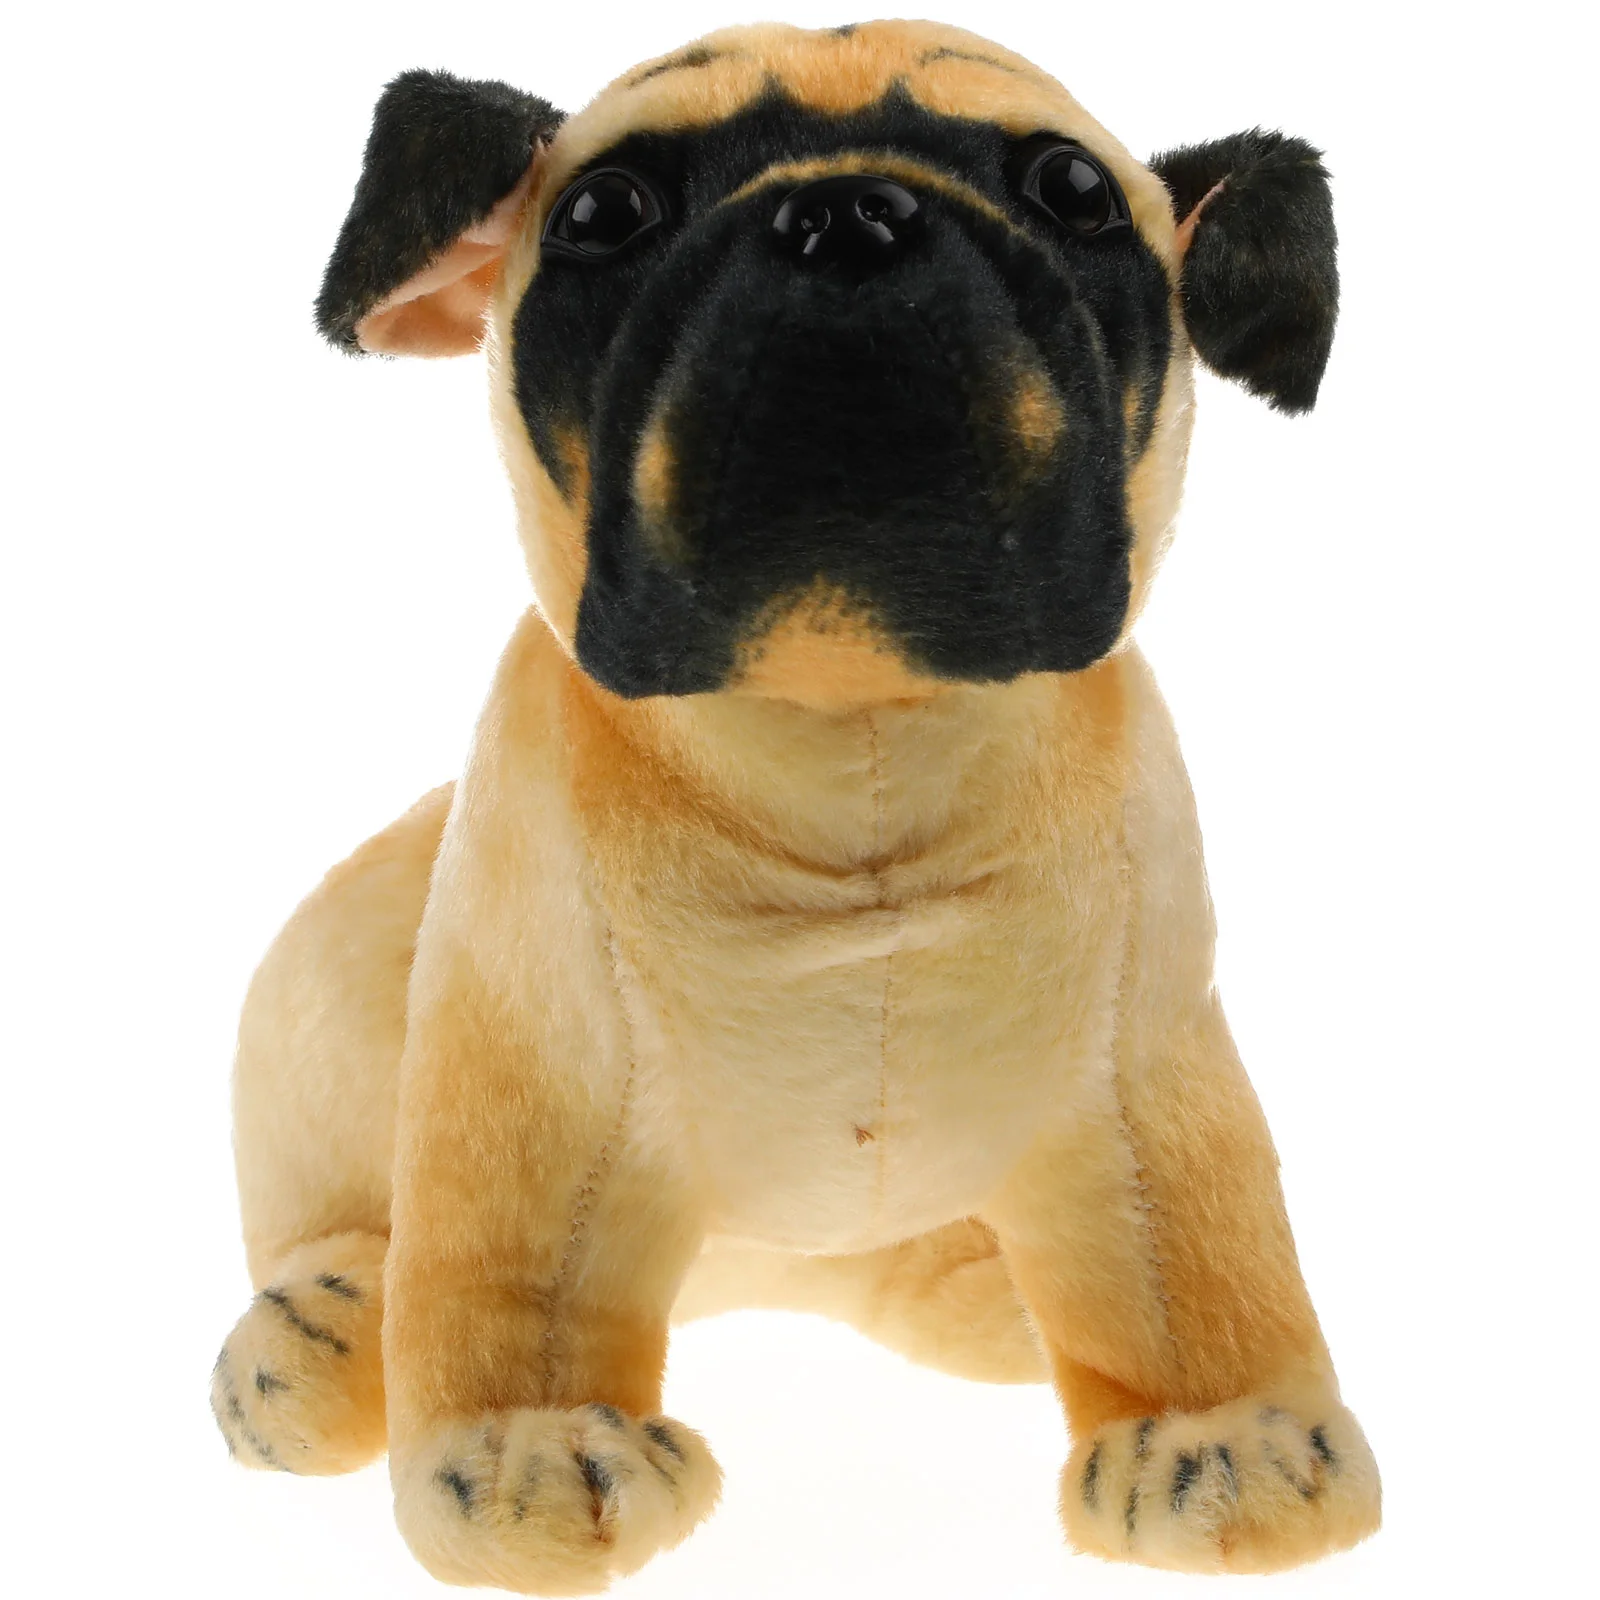 

Brown Pug Stuffed Animal Plush Dog Toy for Kids' Parties and Holidays, 10.6 X 13 Inch